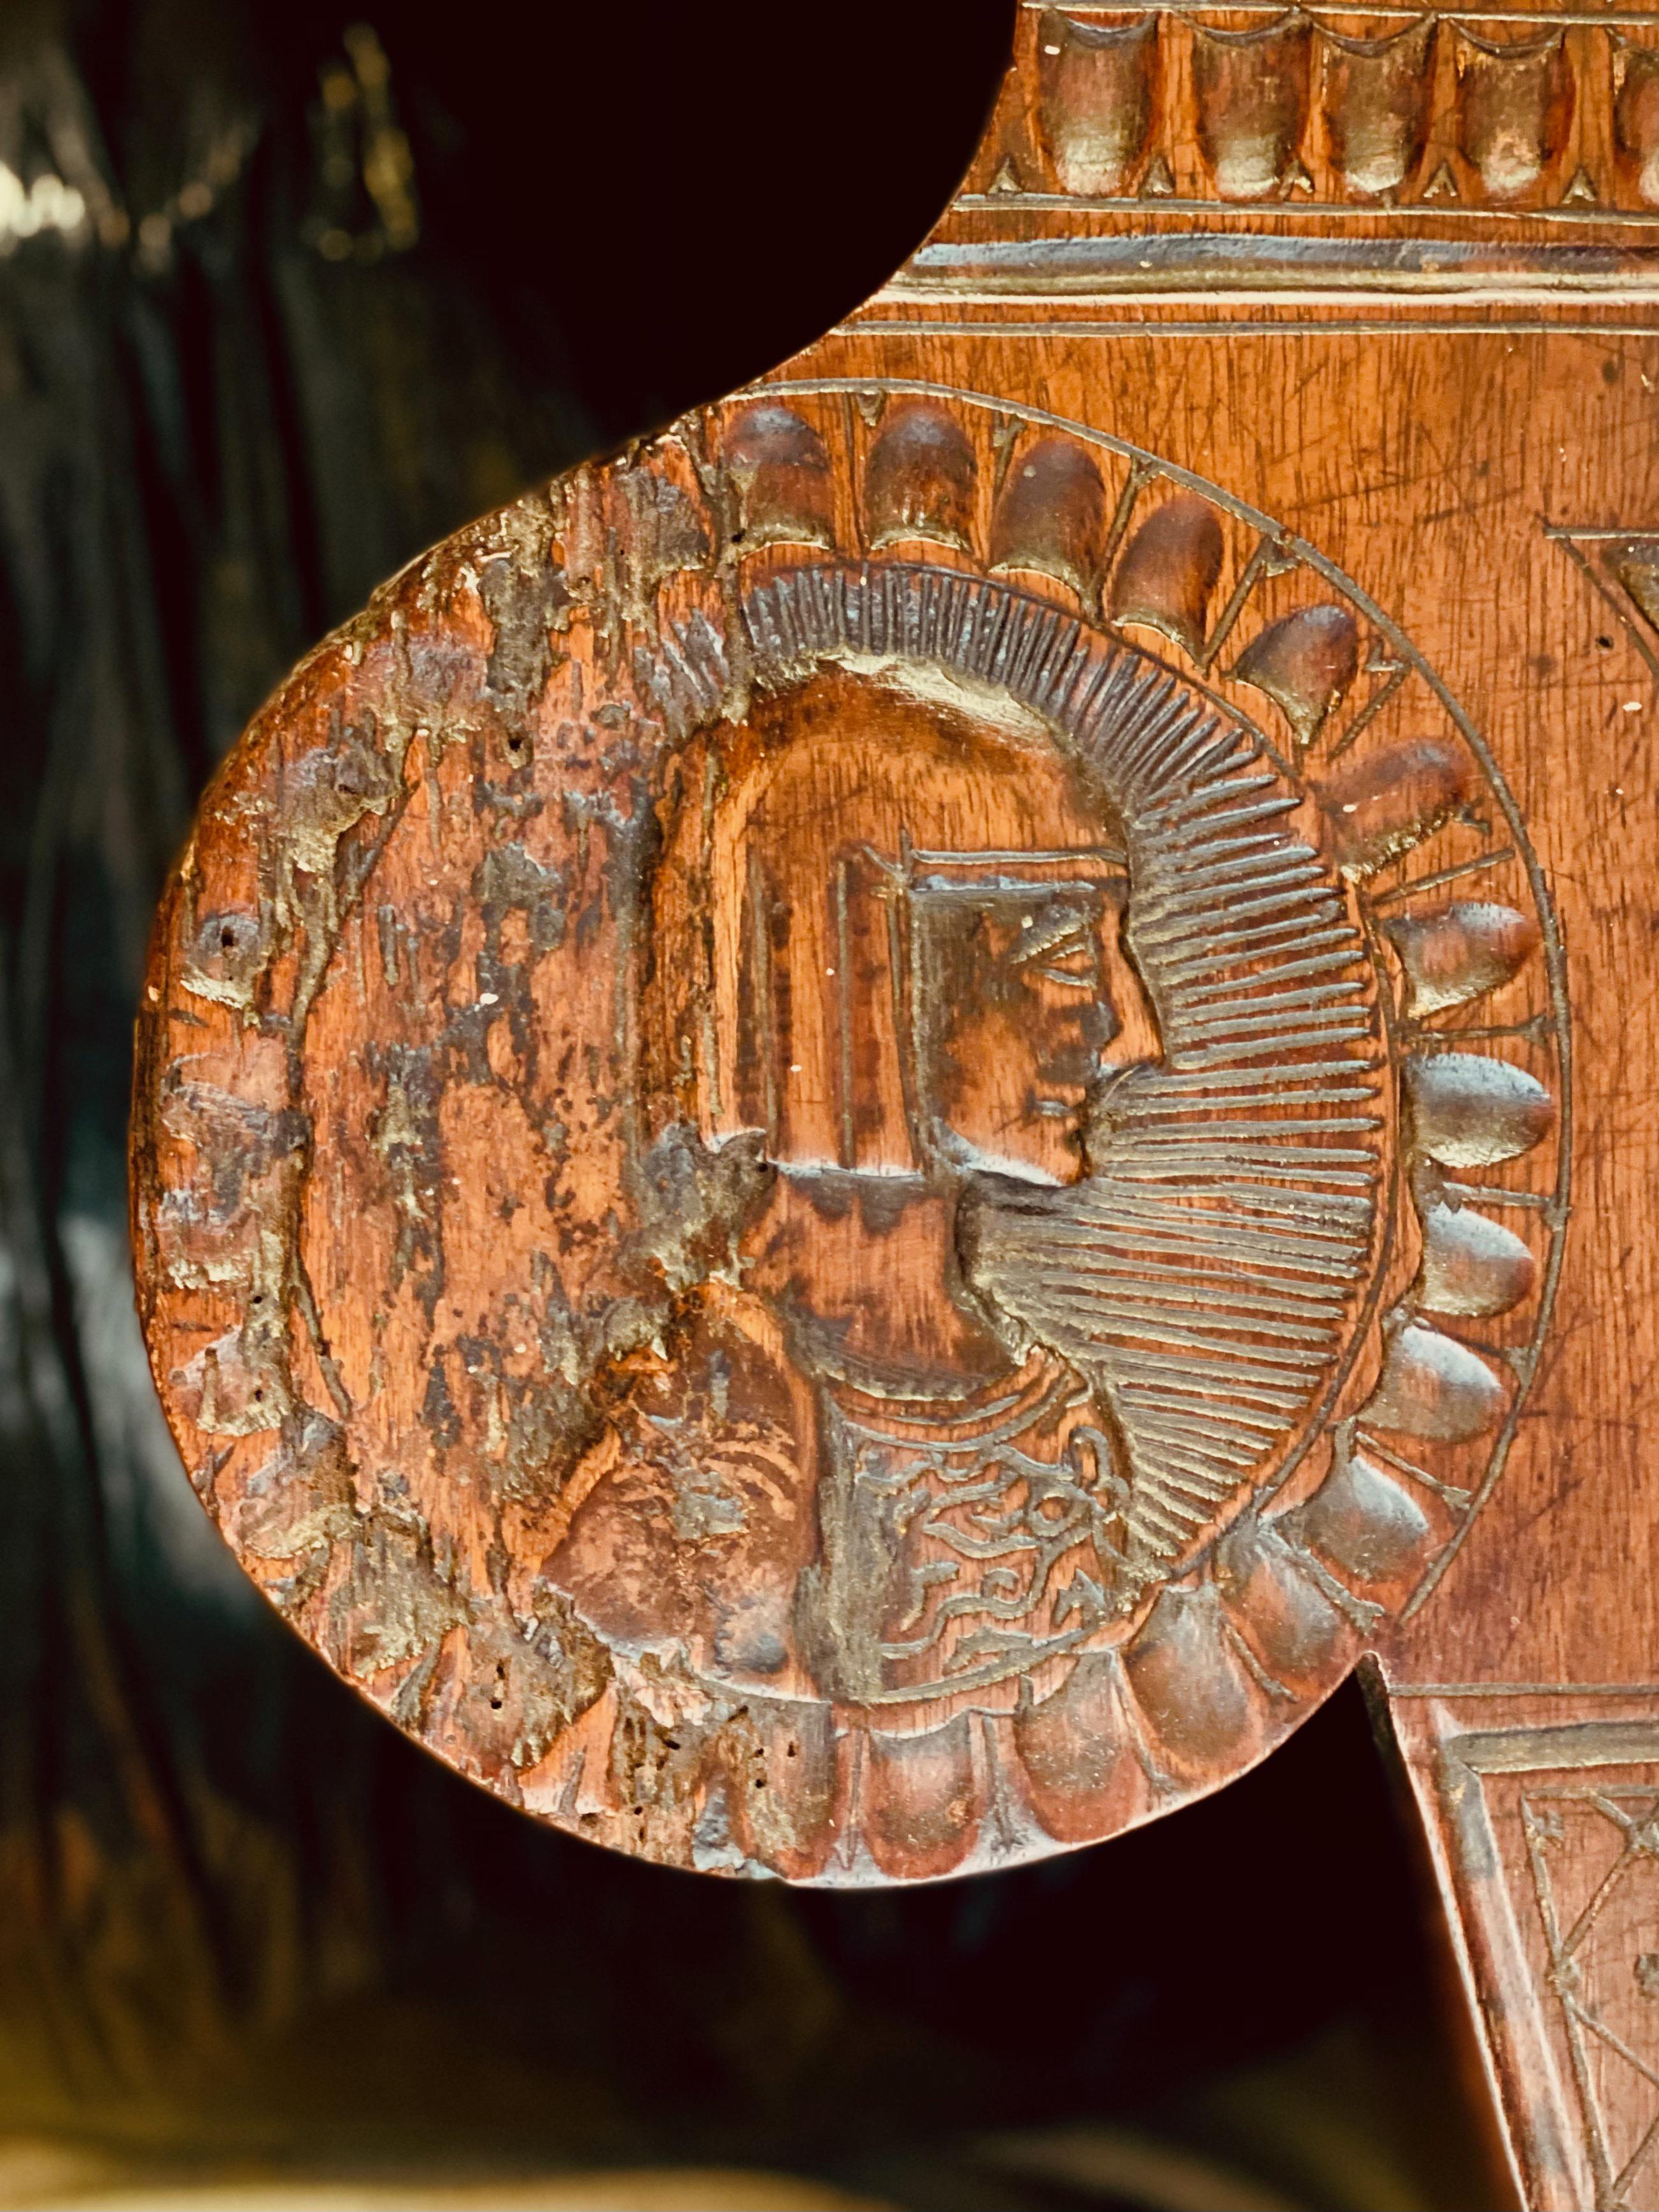 Walnut 17th Cent. Portugese Chip Carved Desk, w. Portraits of Royalty on top and sides